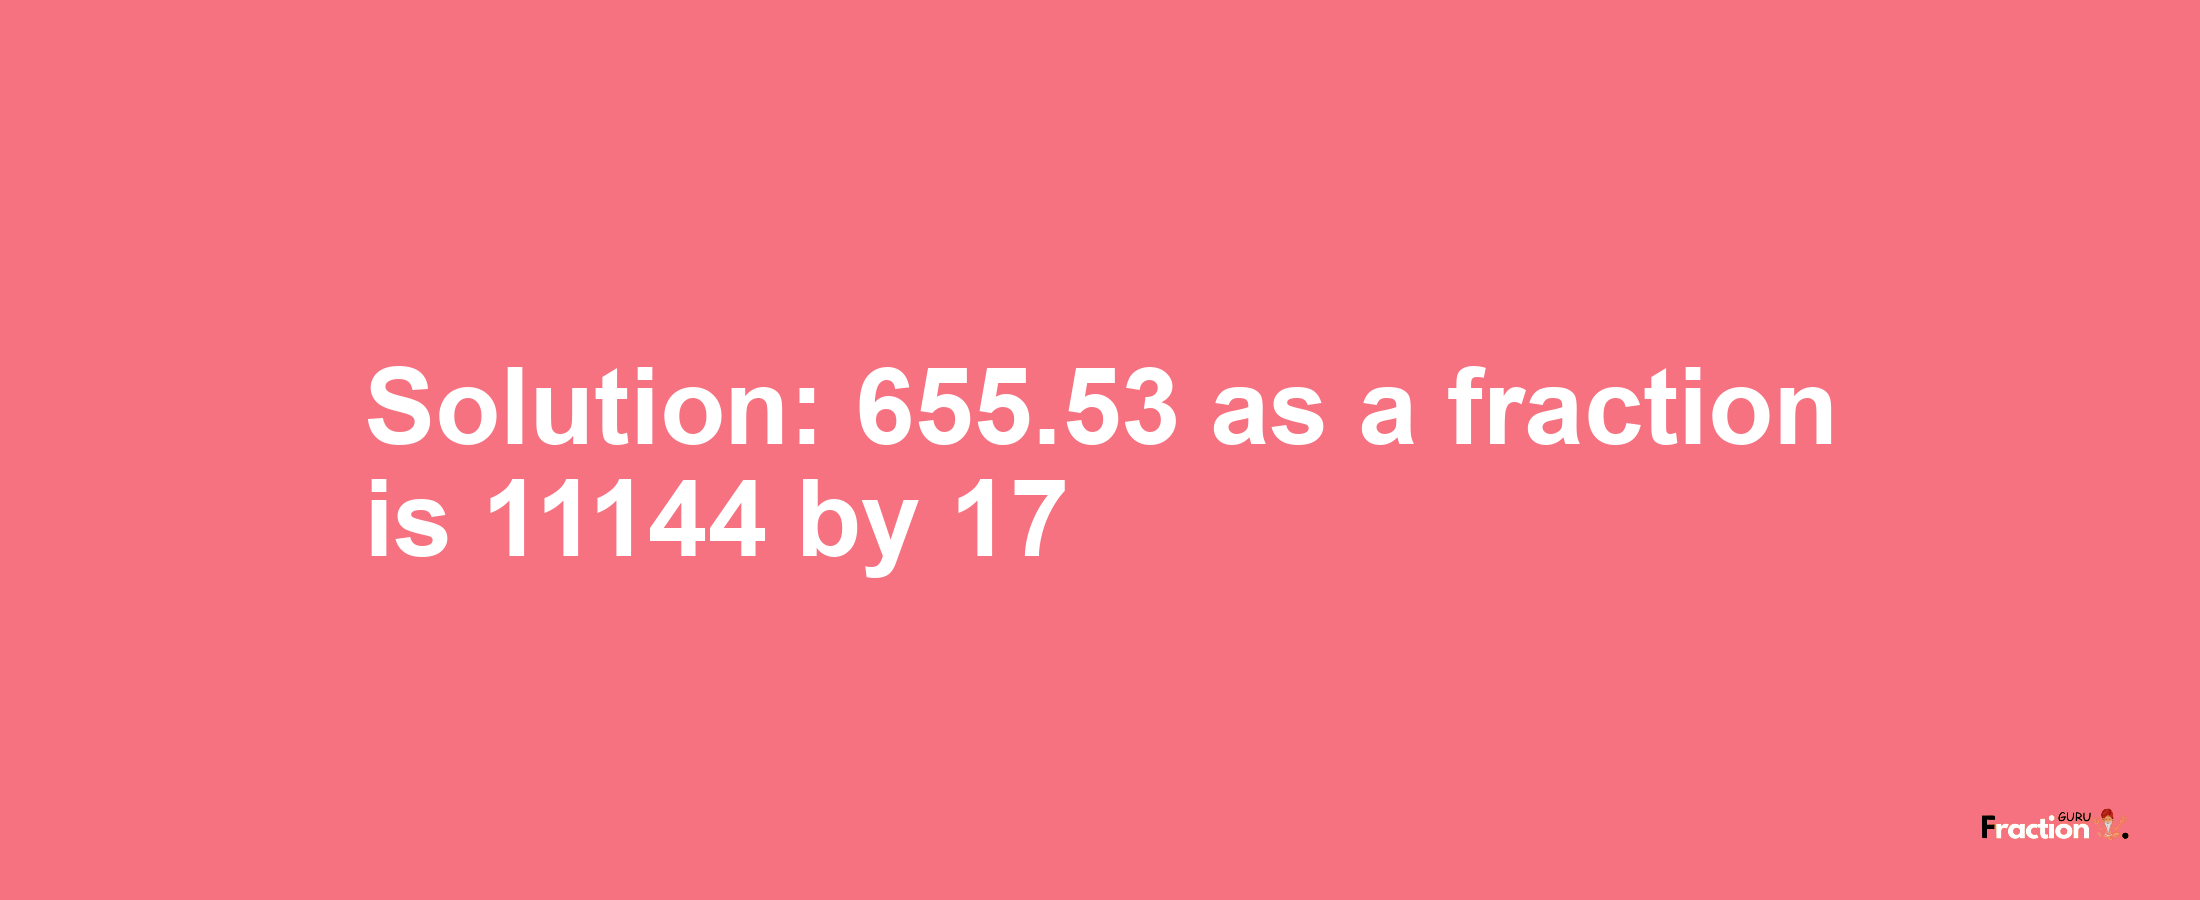 Solution:655.53 as a fraction is 11144/17